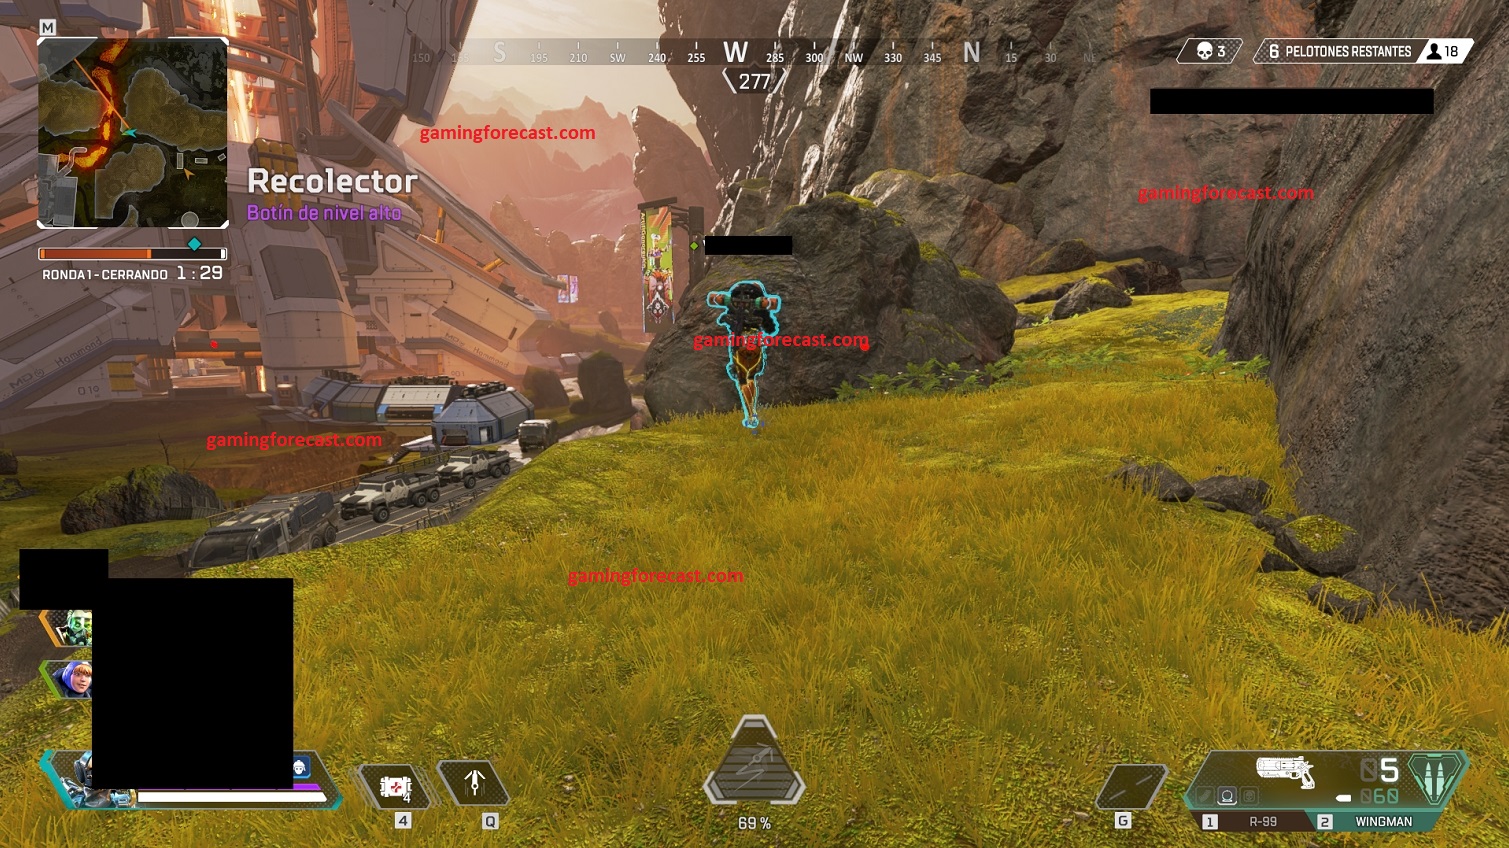 Apex Legends Hacks Free Glow And Aimbot Safe To Use 21 Gaming Forecast Download Free Online Game Hacks